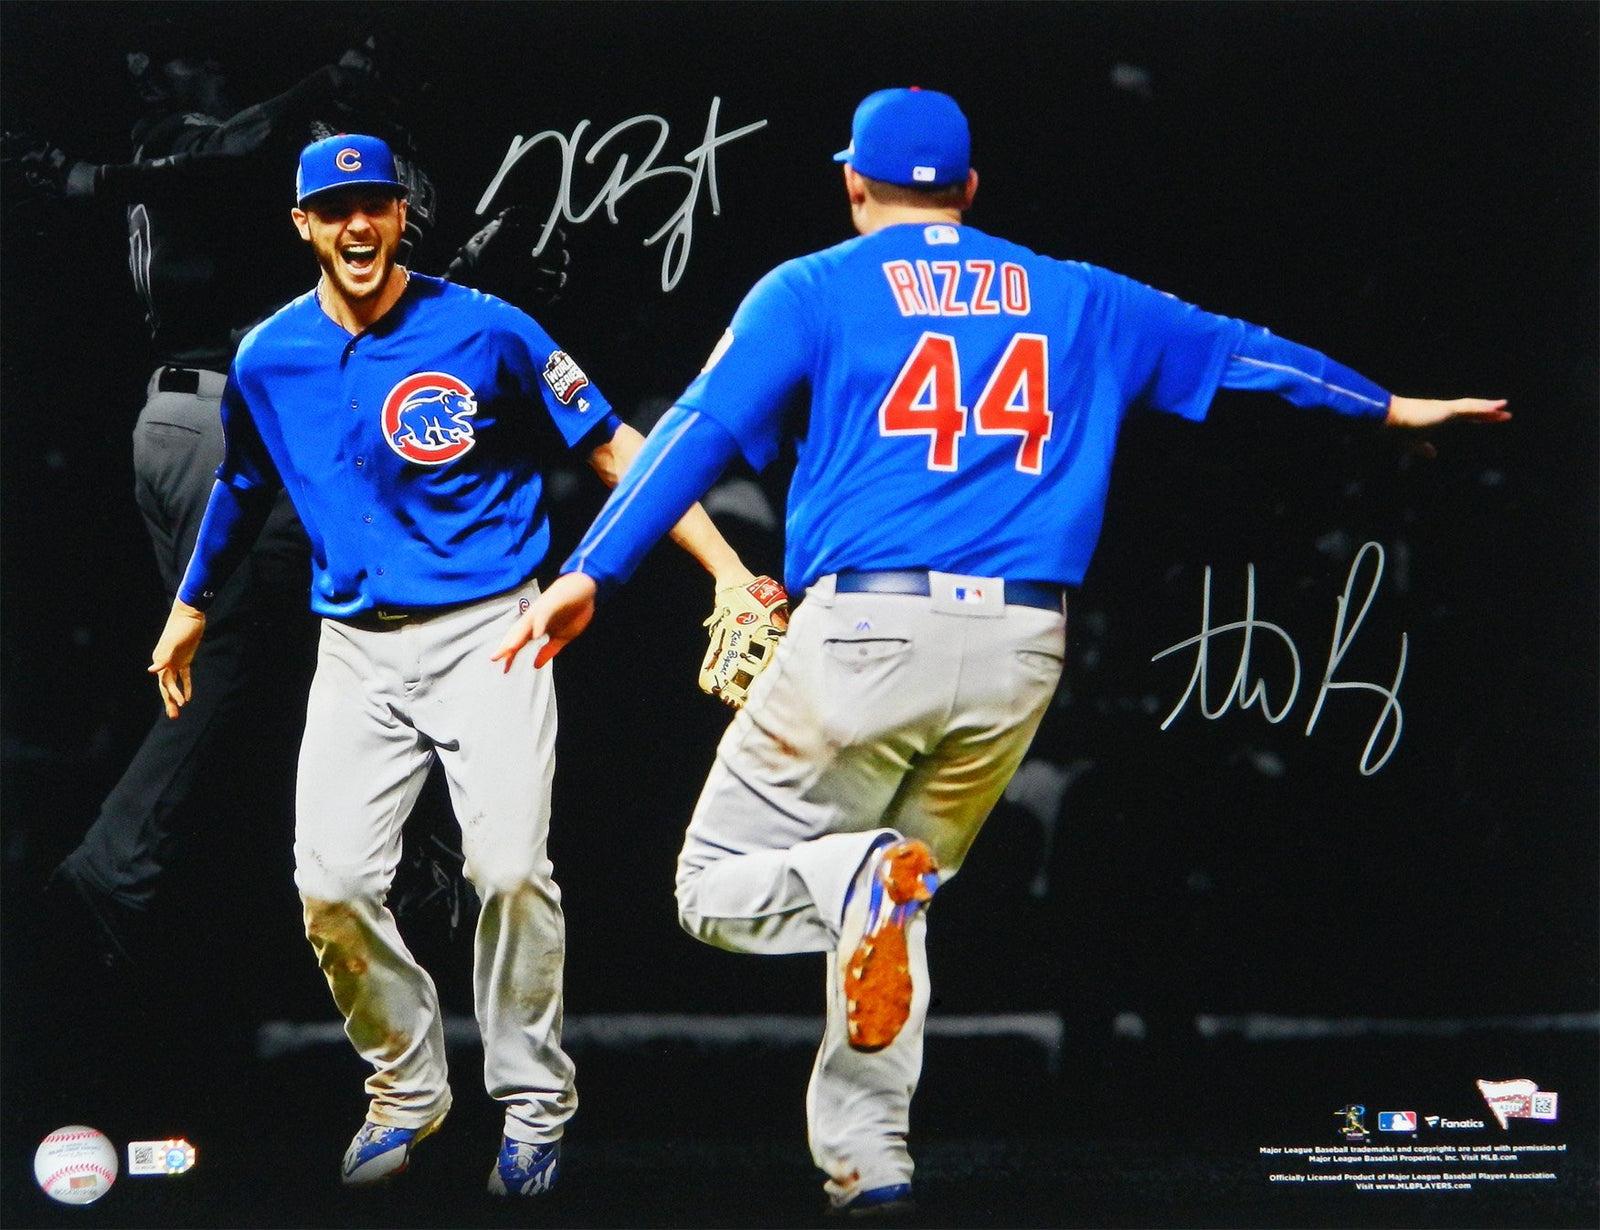 Kris Bryant Chicago Cubs Signed Autograph Official MLB World